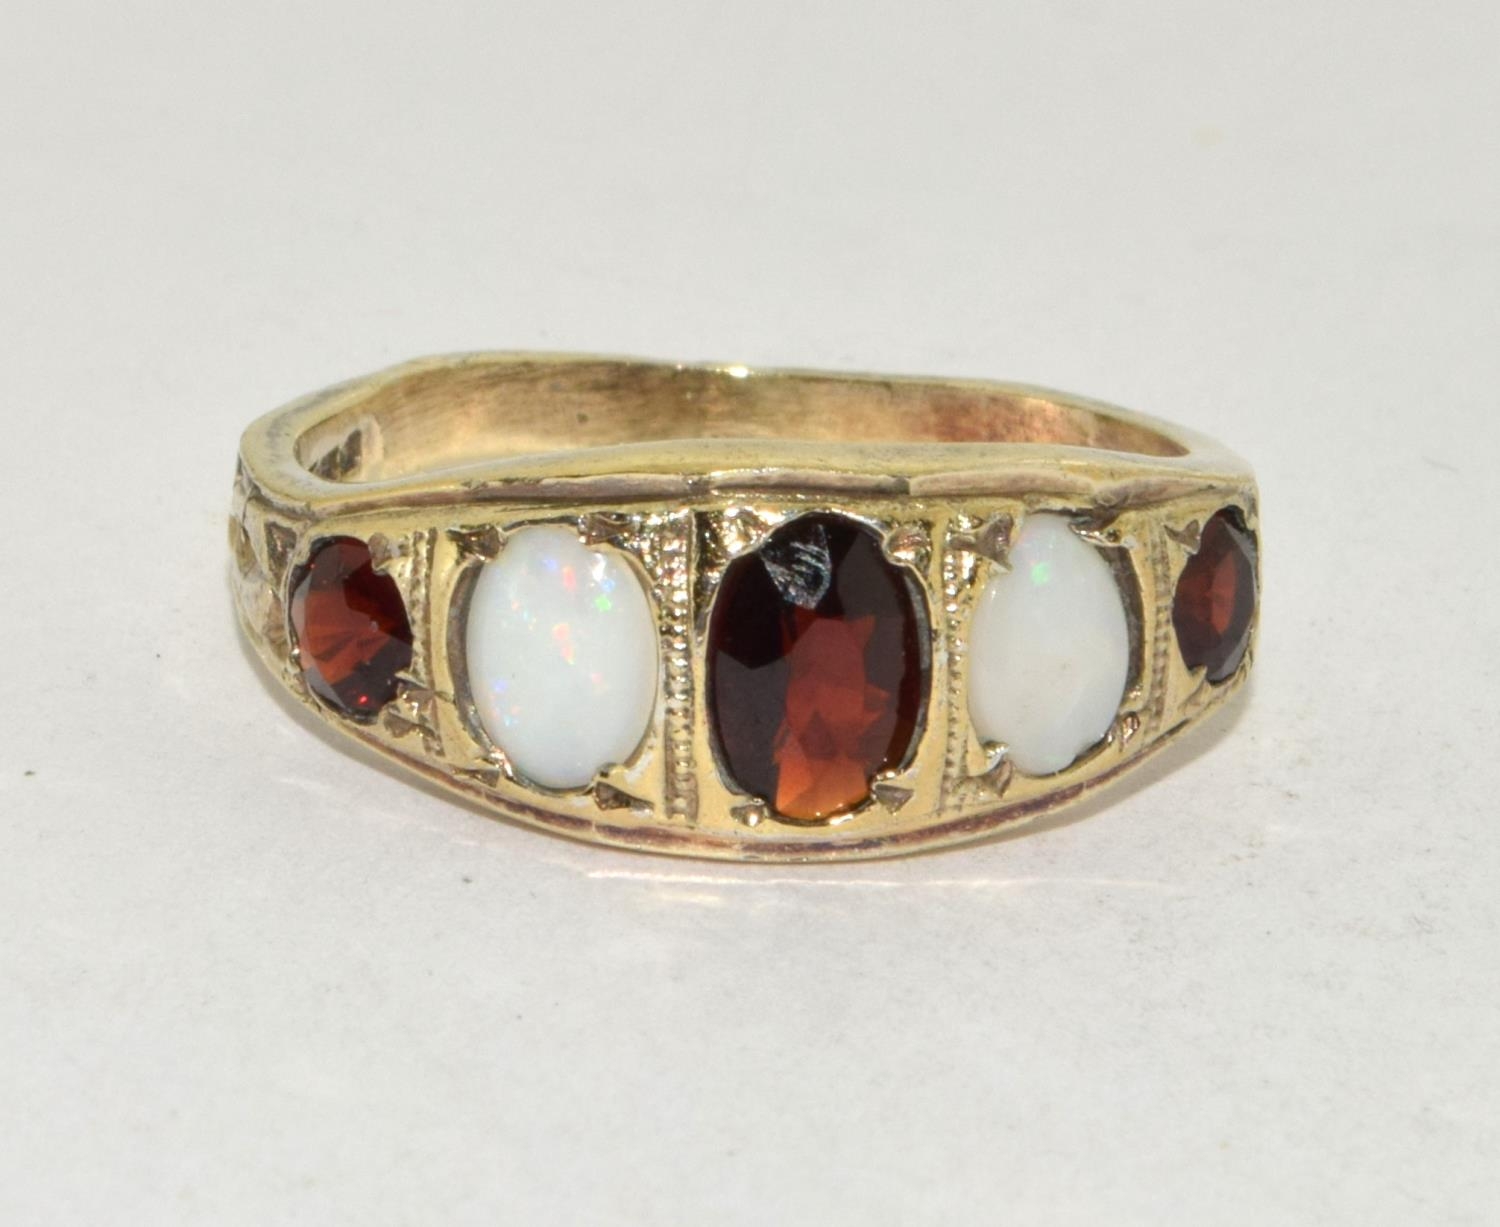 Vintage 9ct gold Opal and Garnet 5 stone ring size O - Image 5 of 5